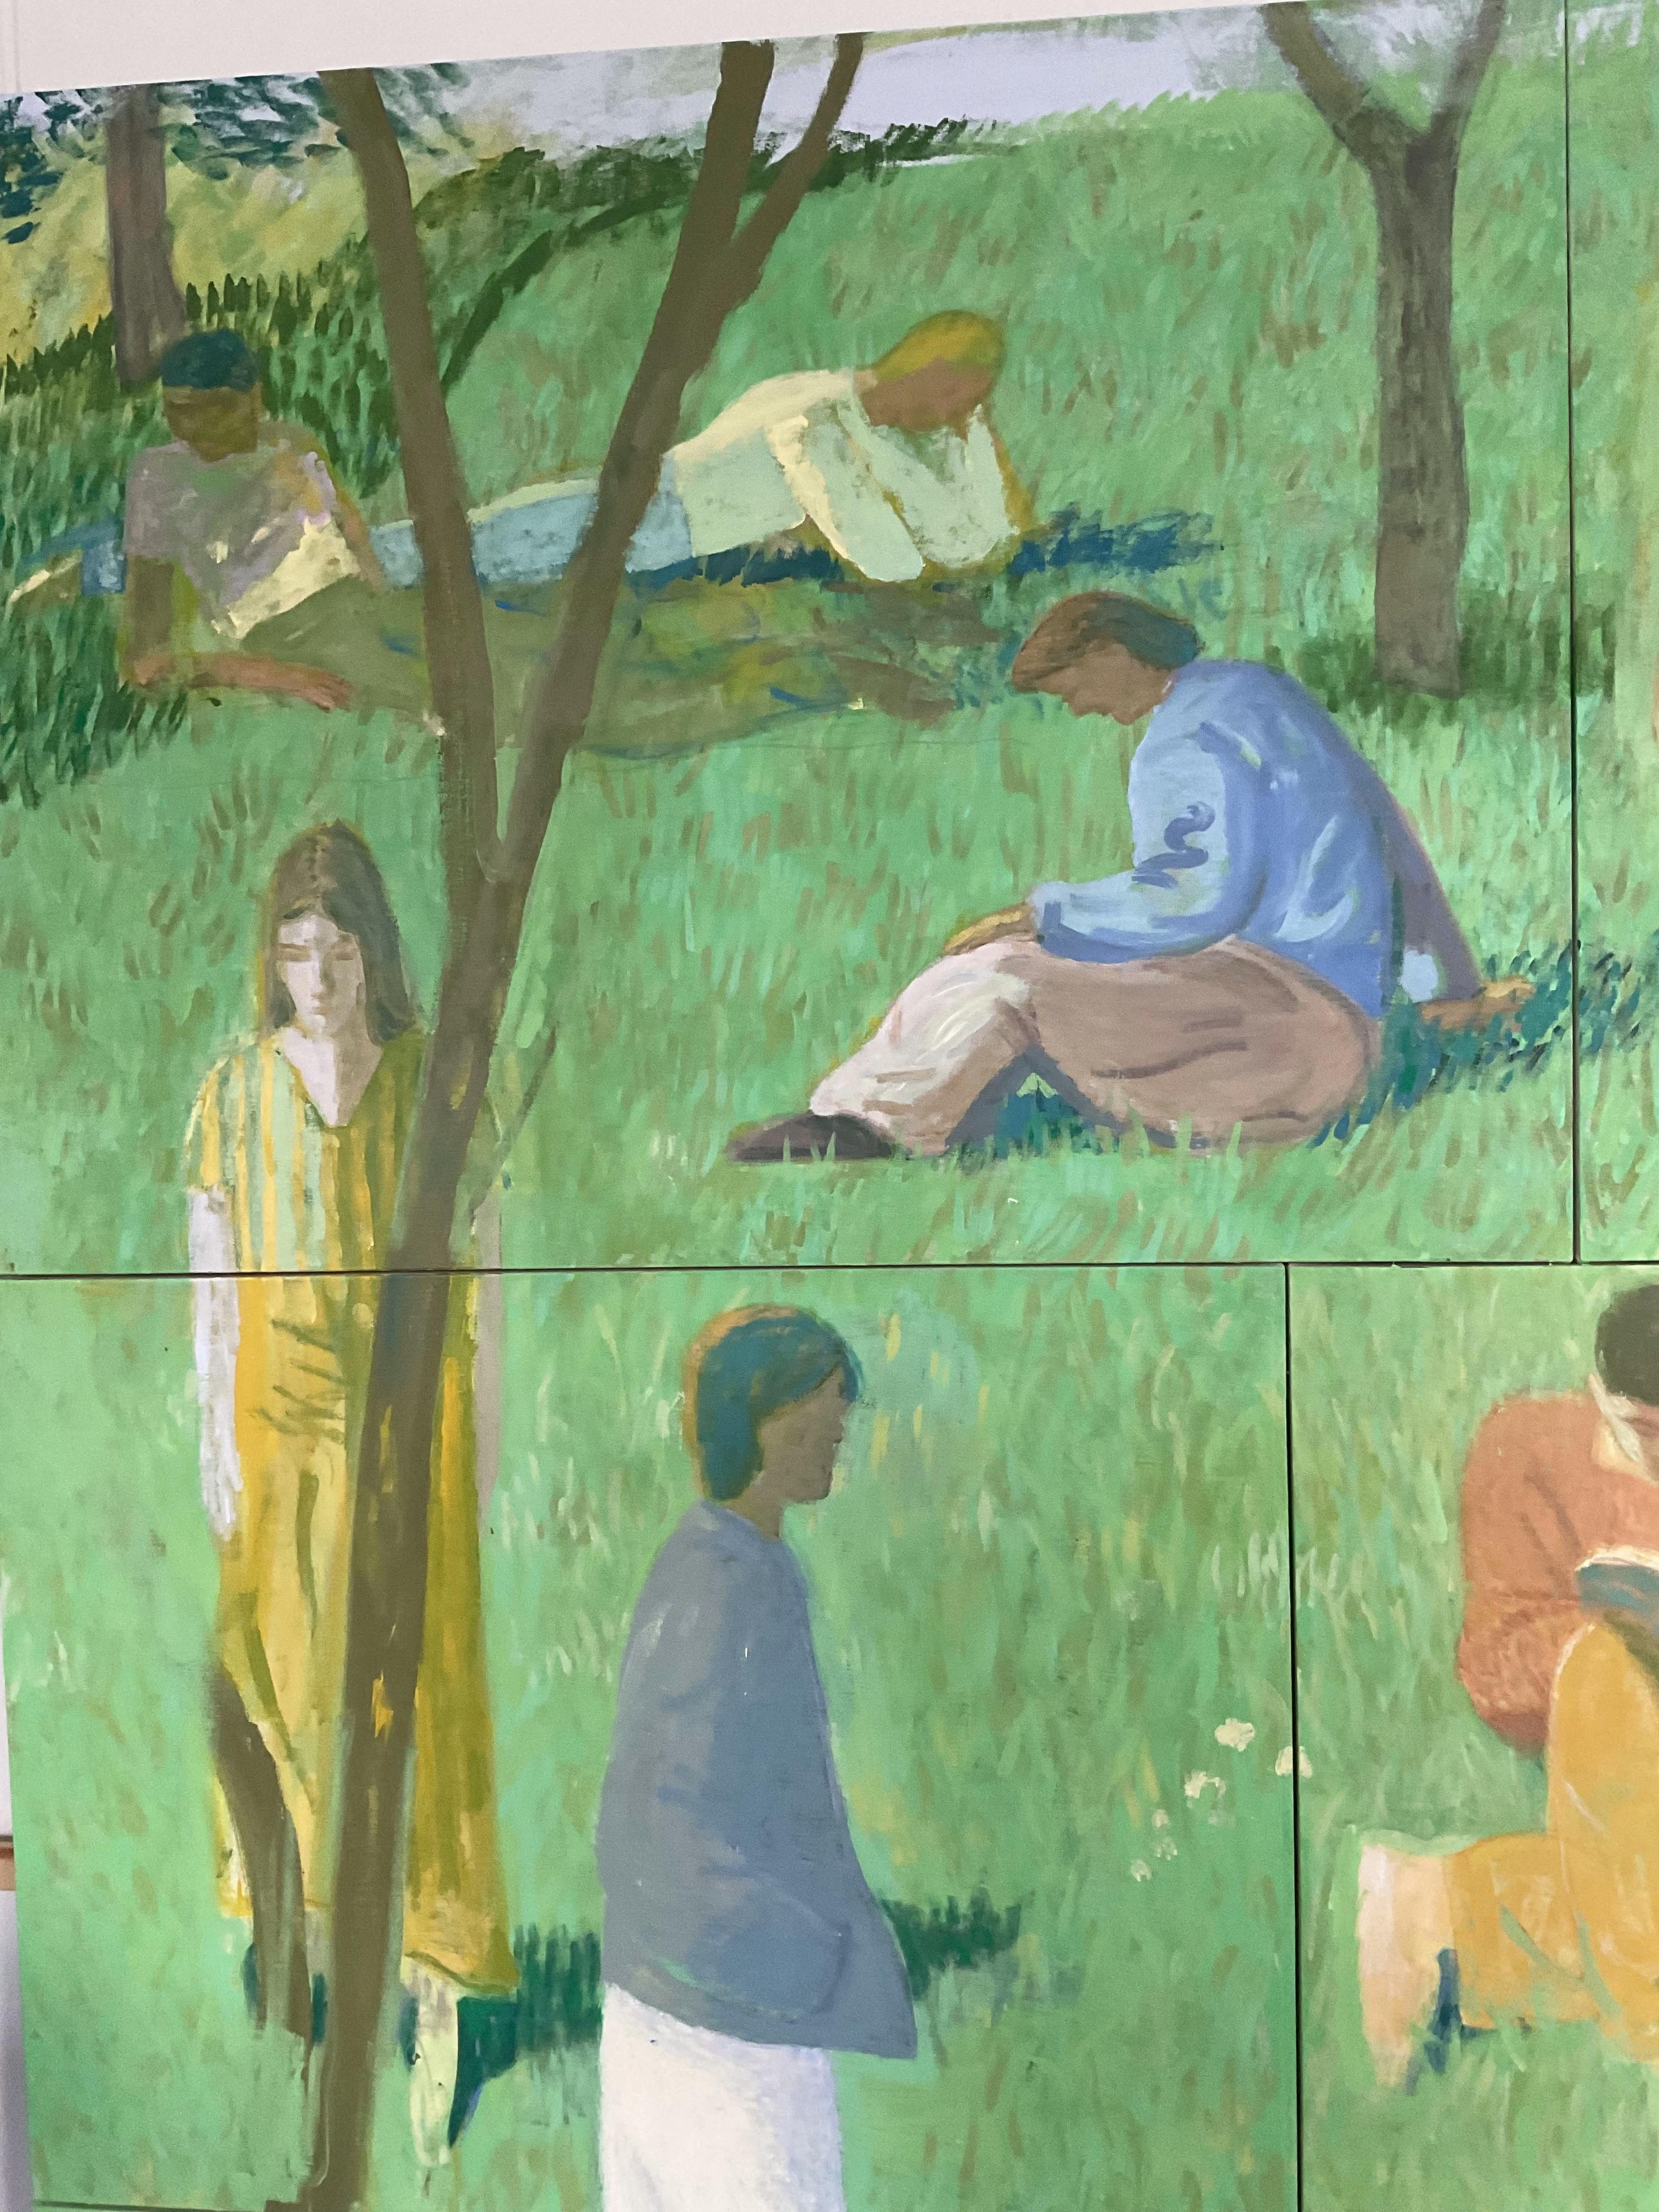 A close-up of a figurative painting by artist Jackson Joyce of people laying in a grassy park with trees.